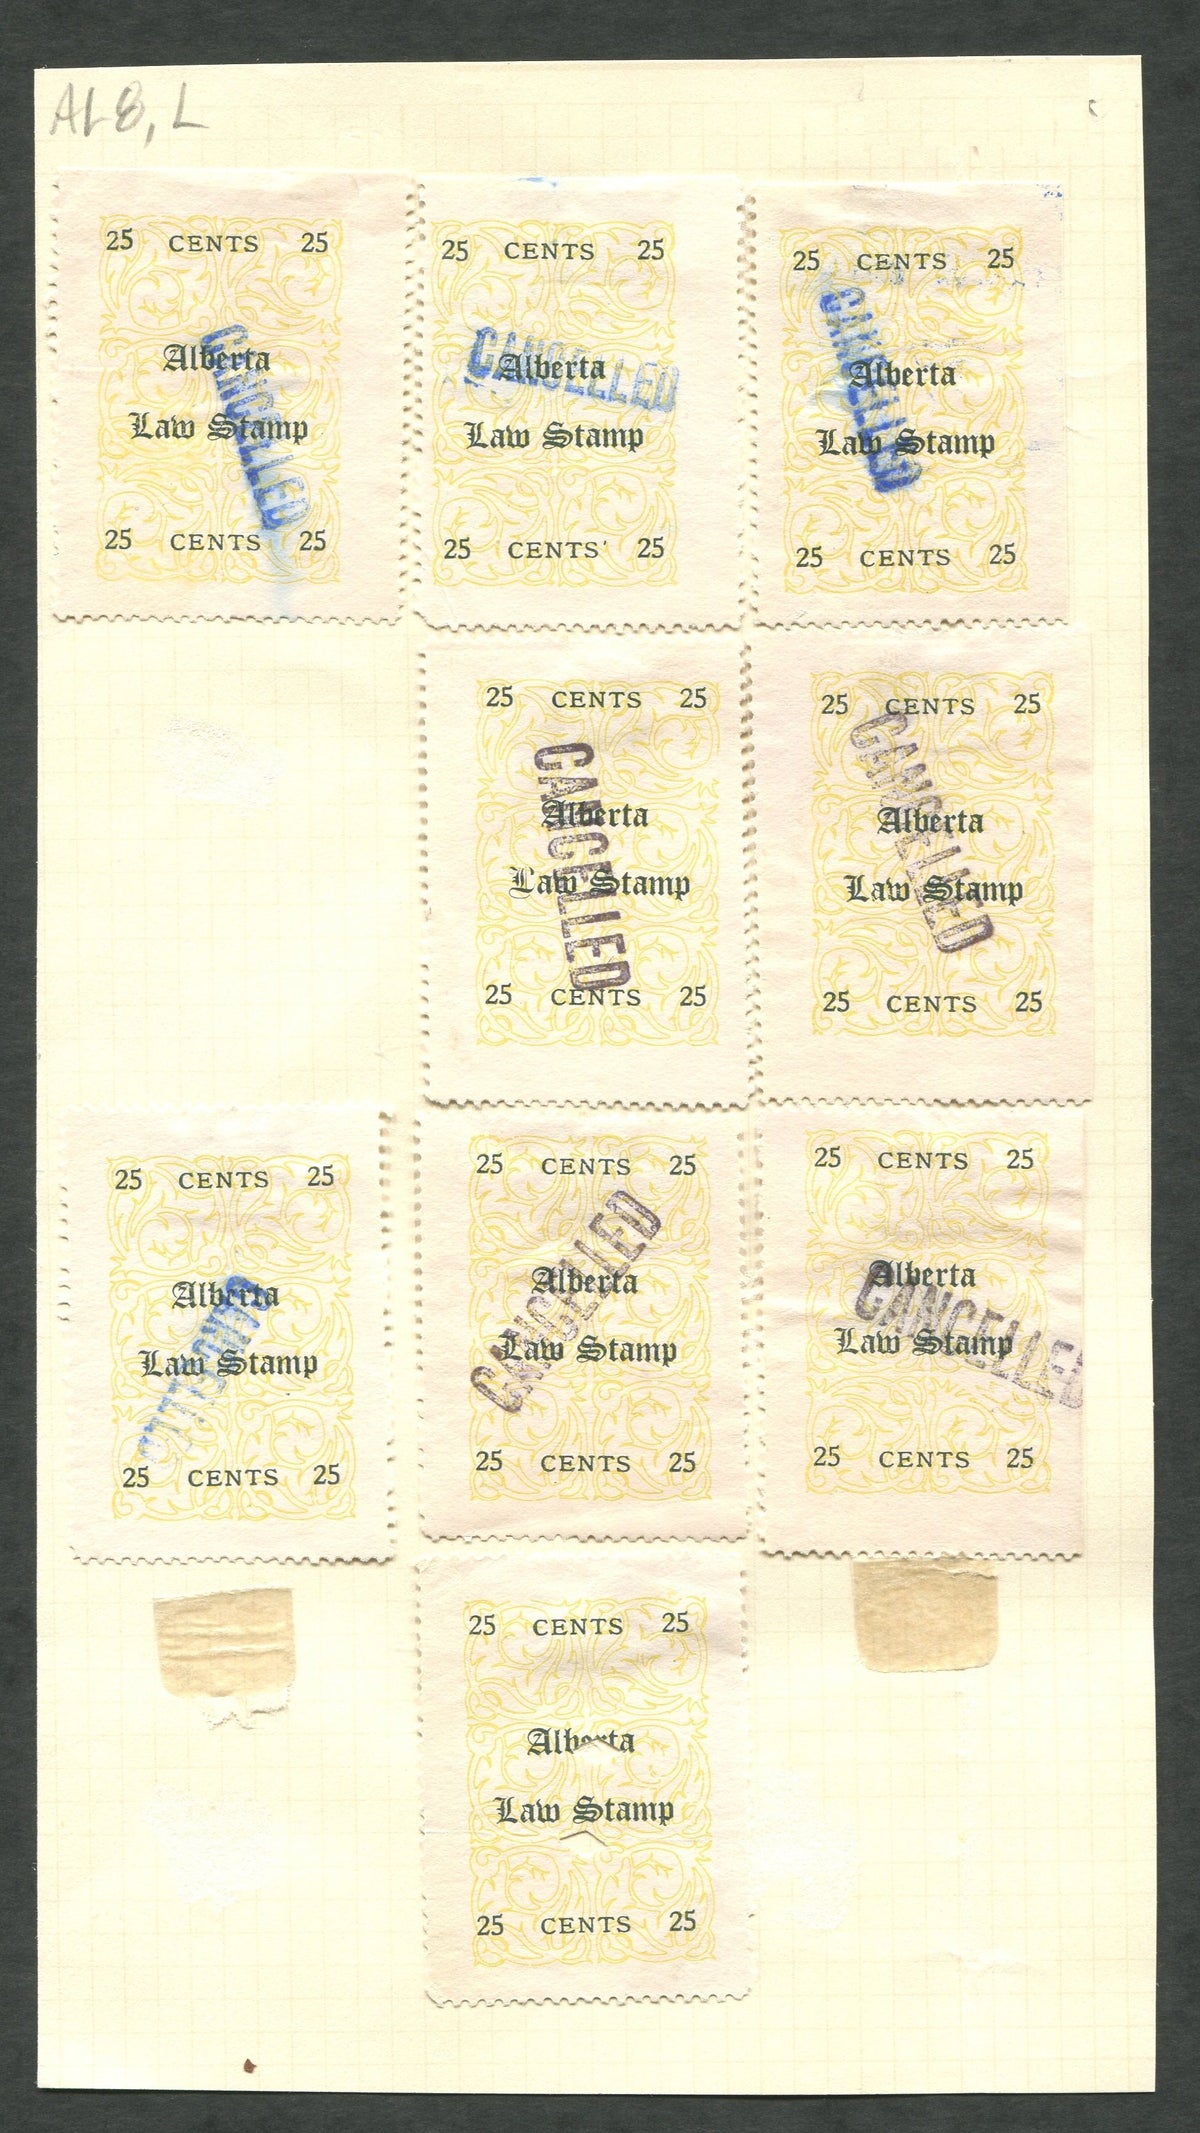 0008AL1709 - AL8,L - Used Partially Reconstructed Sheet - Deveney Stamps Ltd. Canadian Stamps